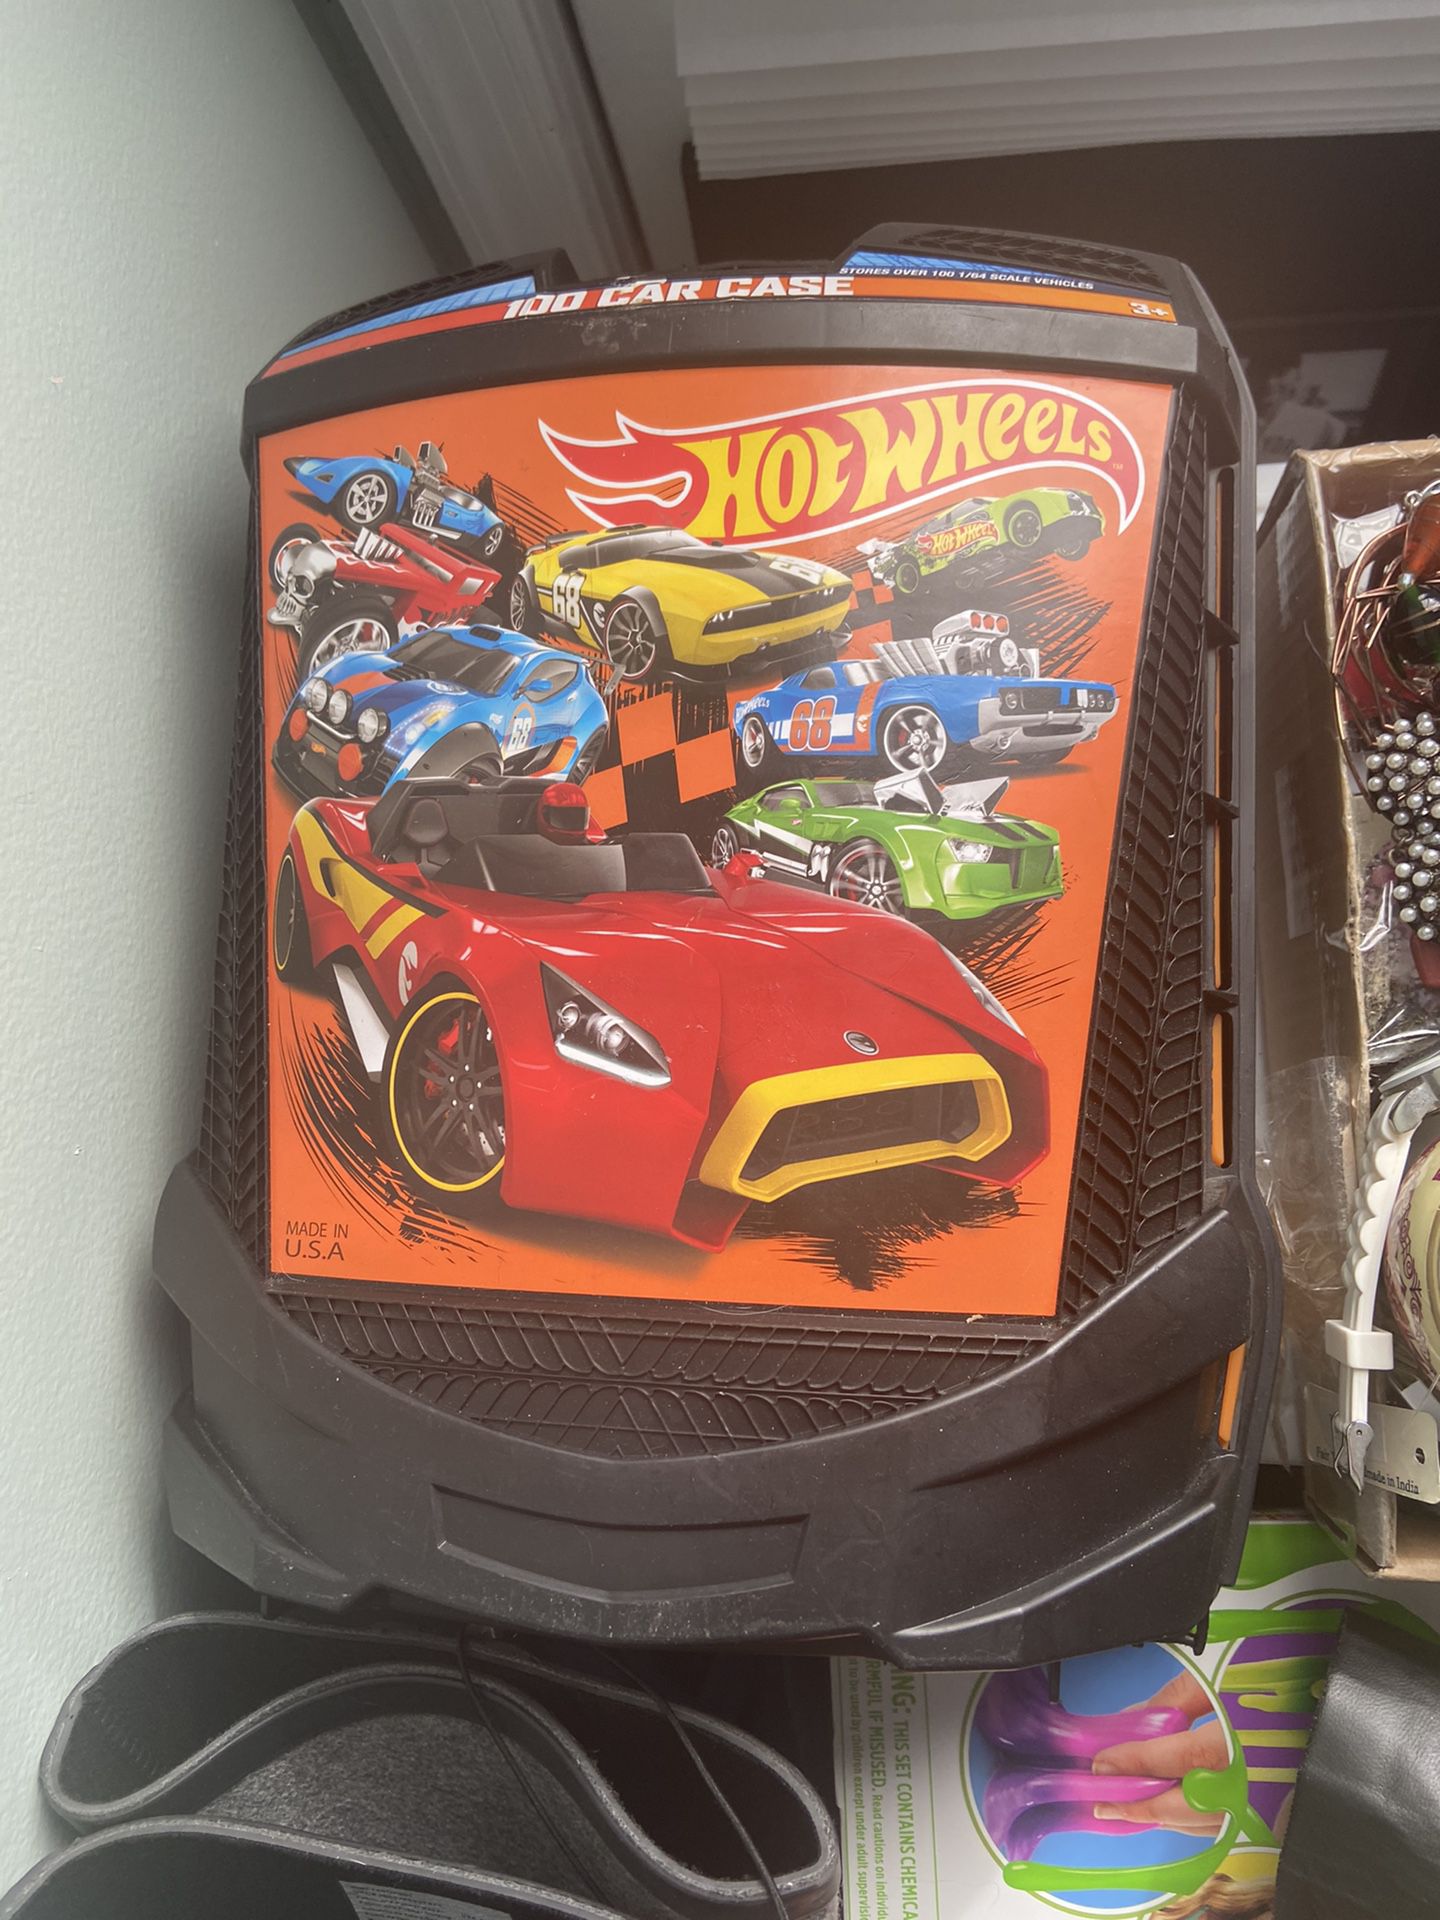 Hot wheels 100 cars carrying case w/cars